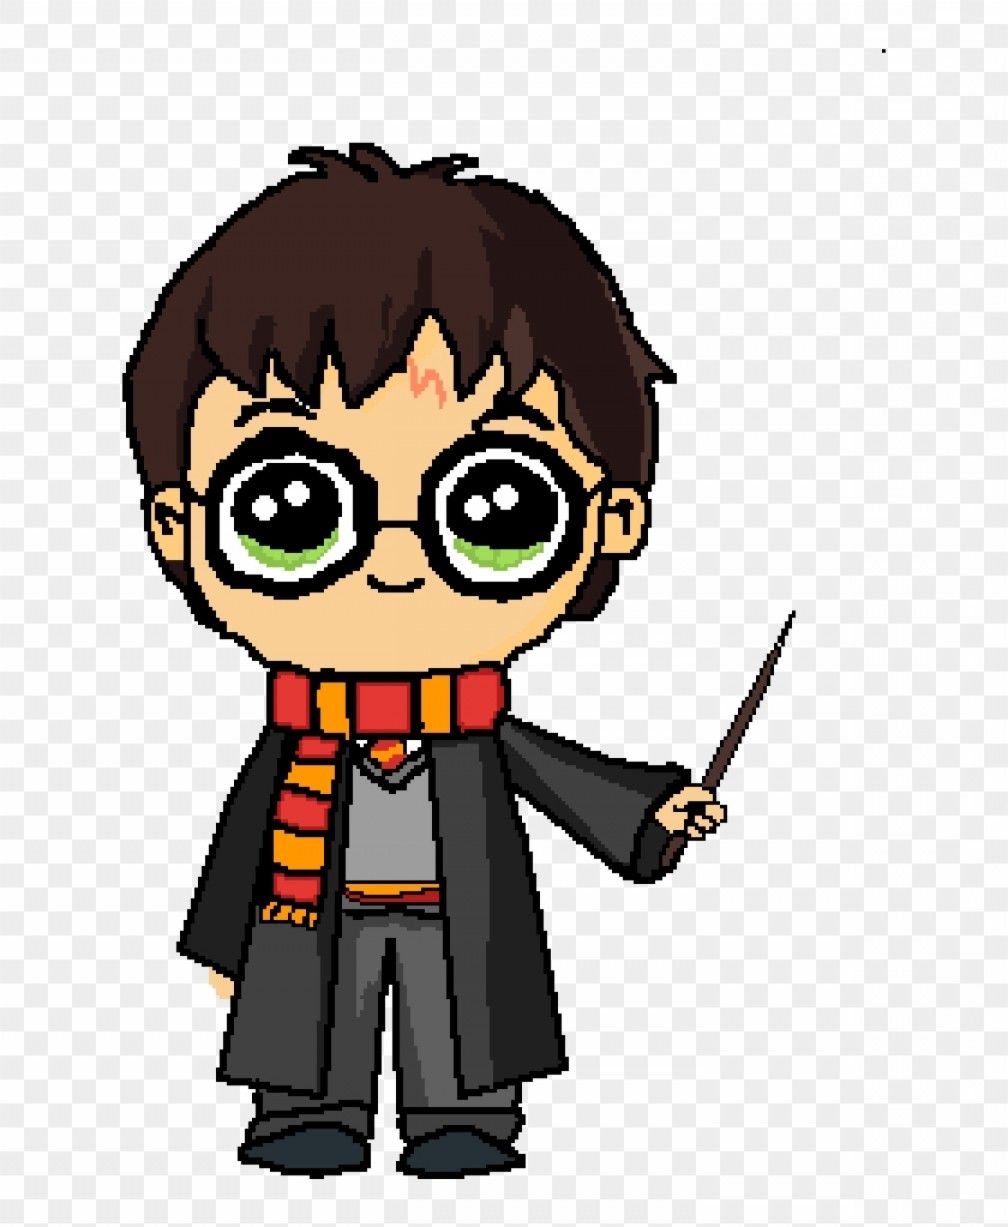 Download Free png Mikgbnnbharry Potter Harry Potter Cartoon